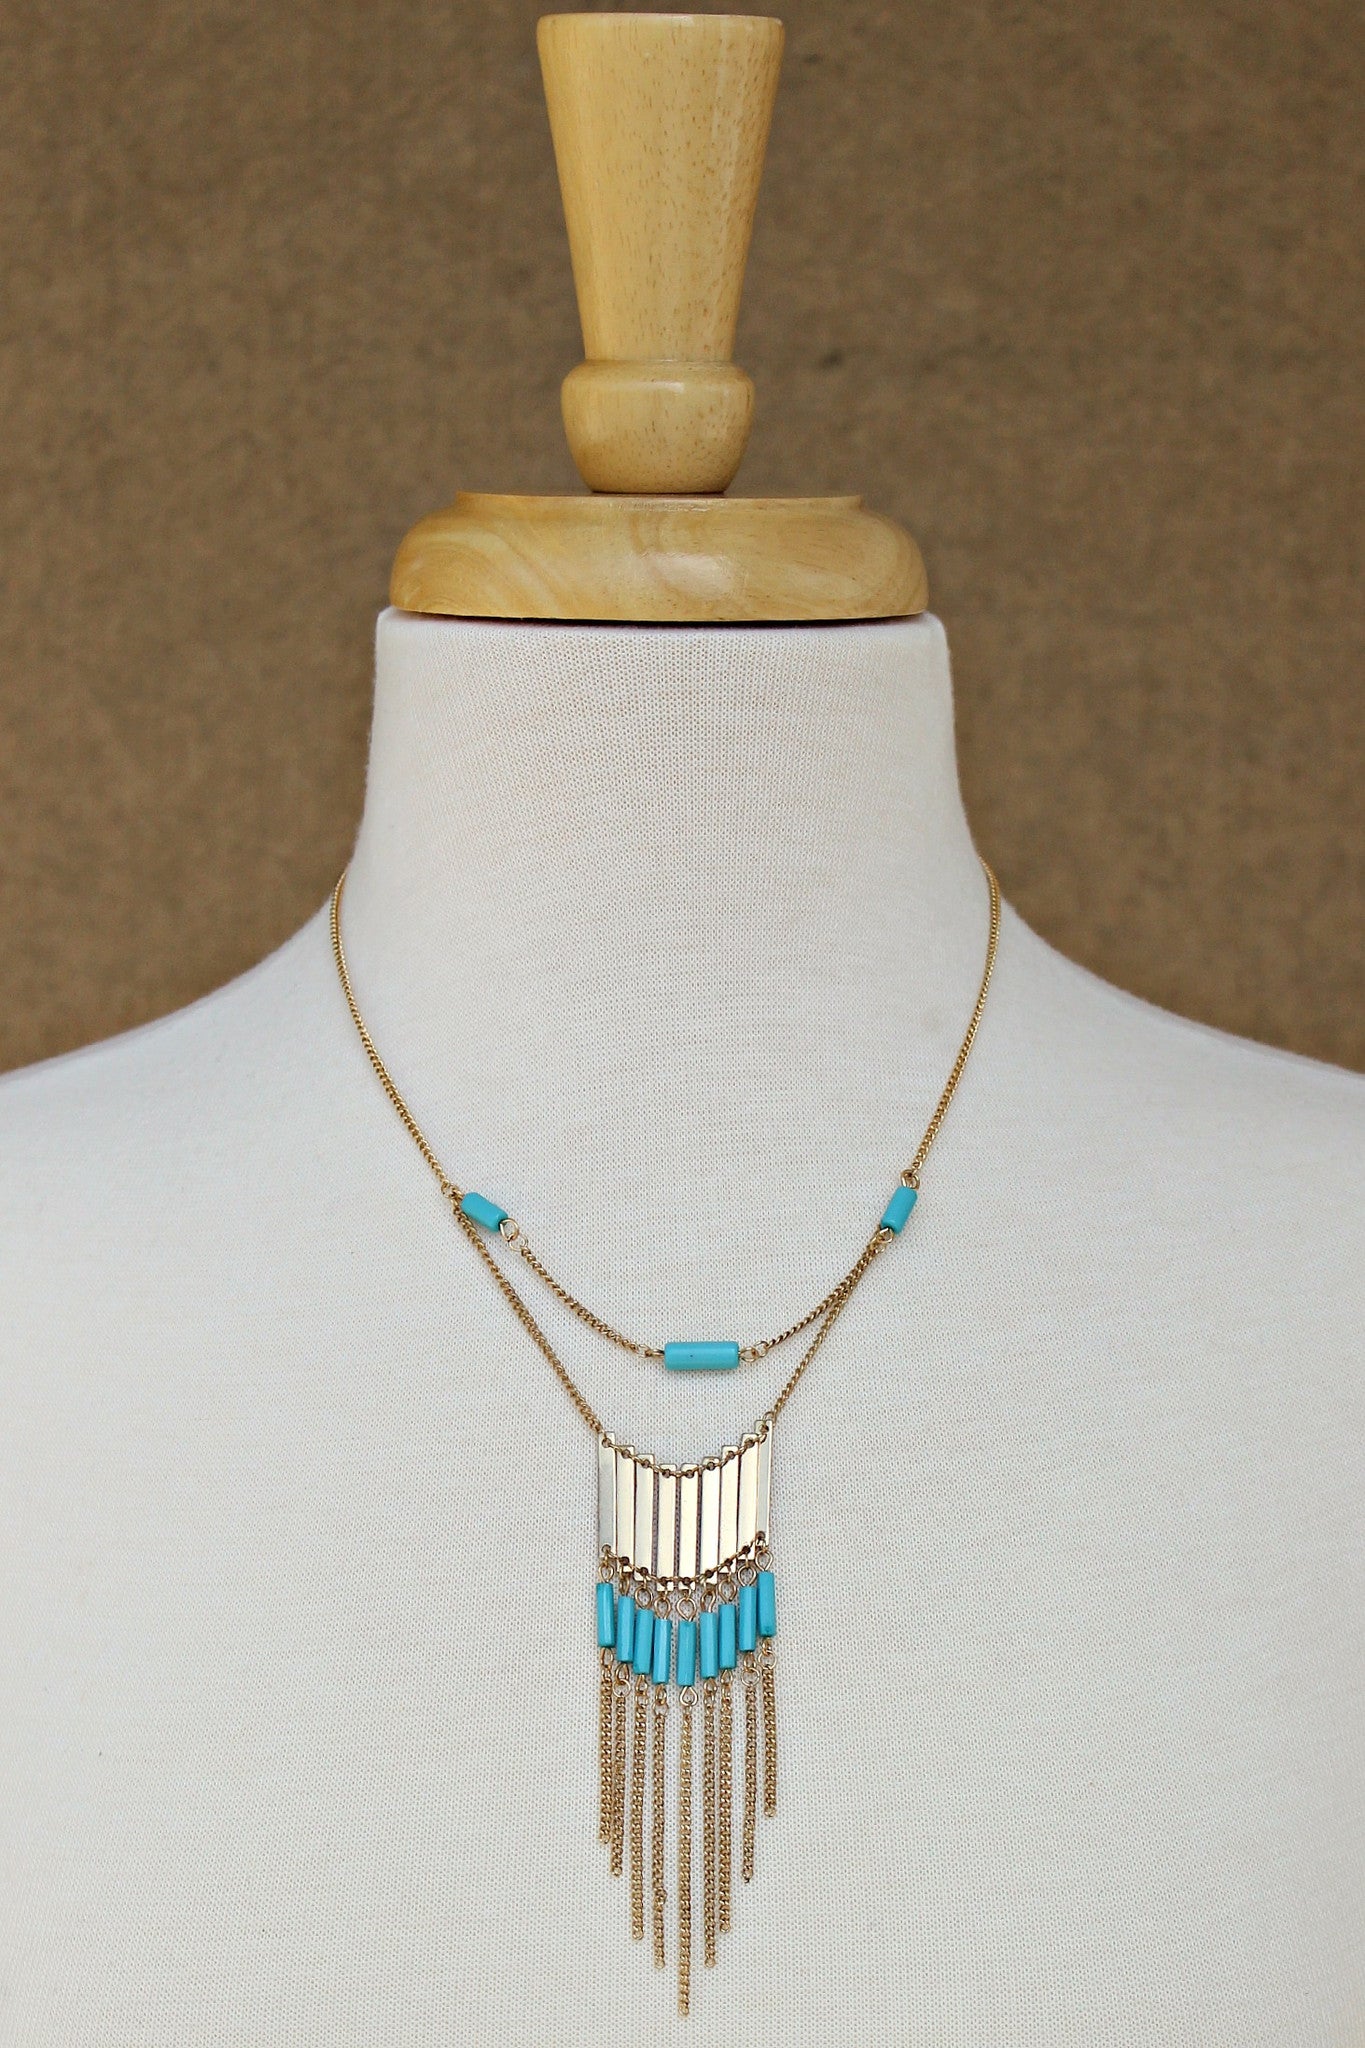 Bars, Beads, and Chains Necklace, Turquoise